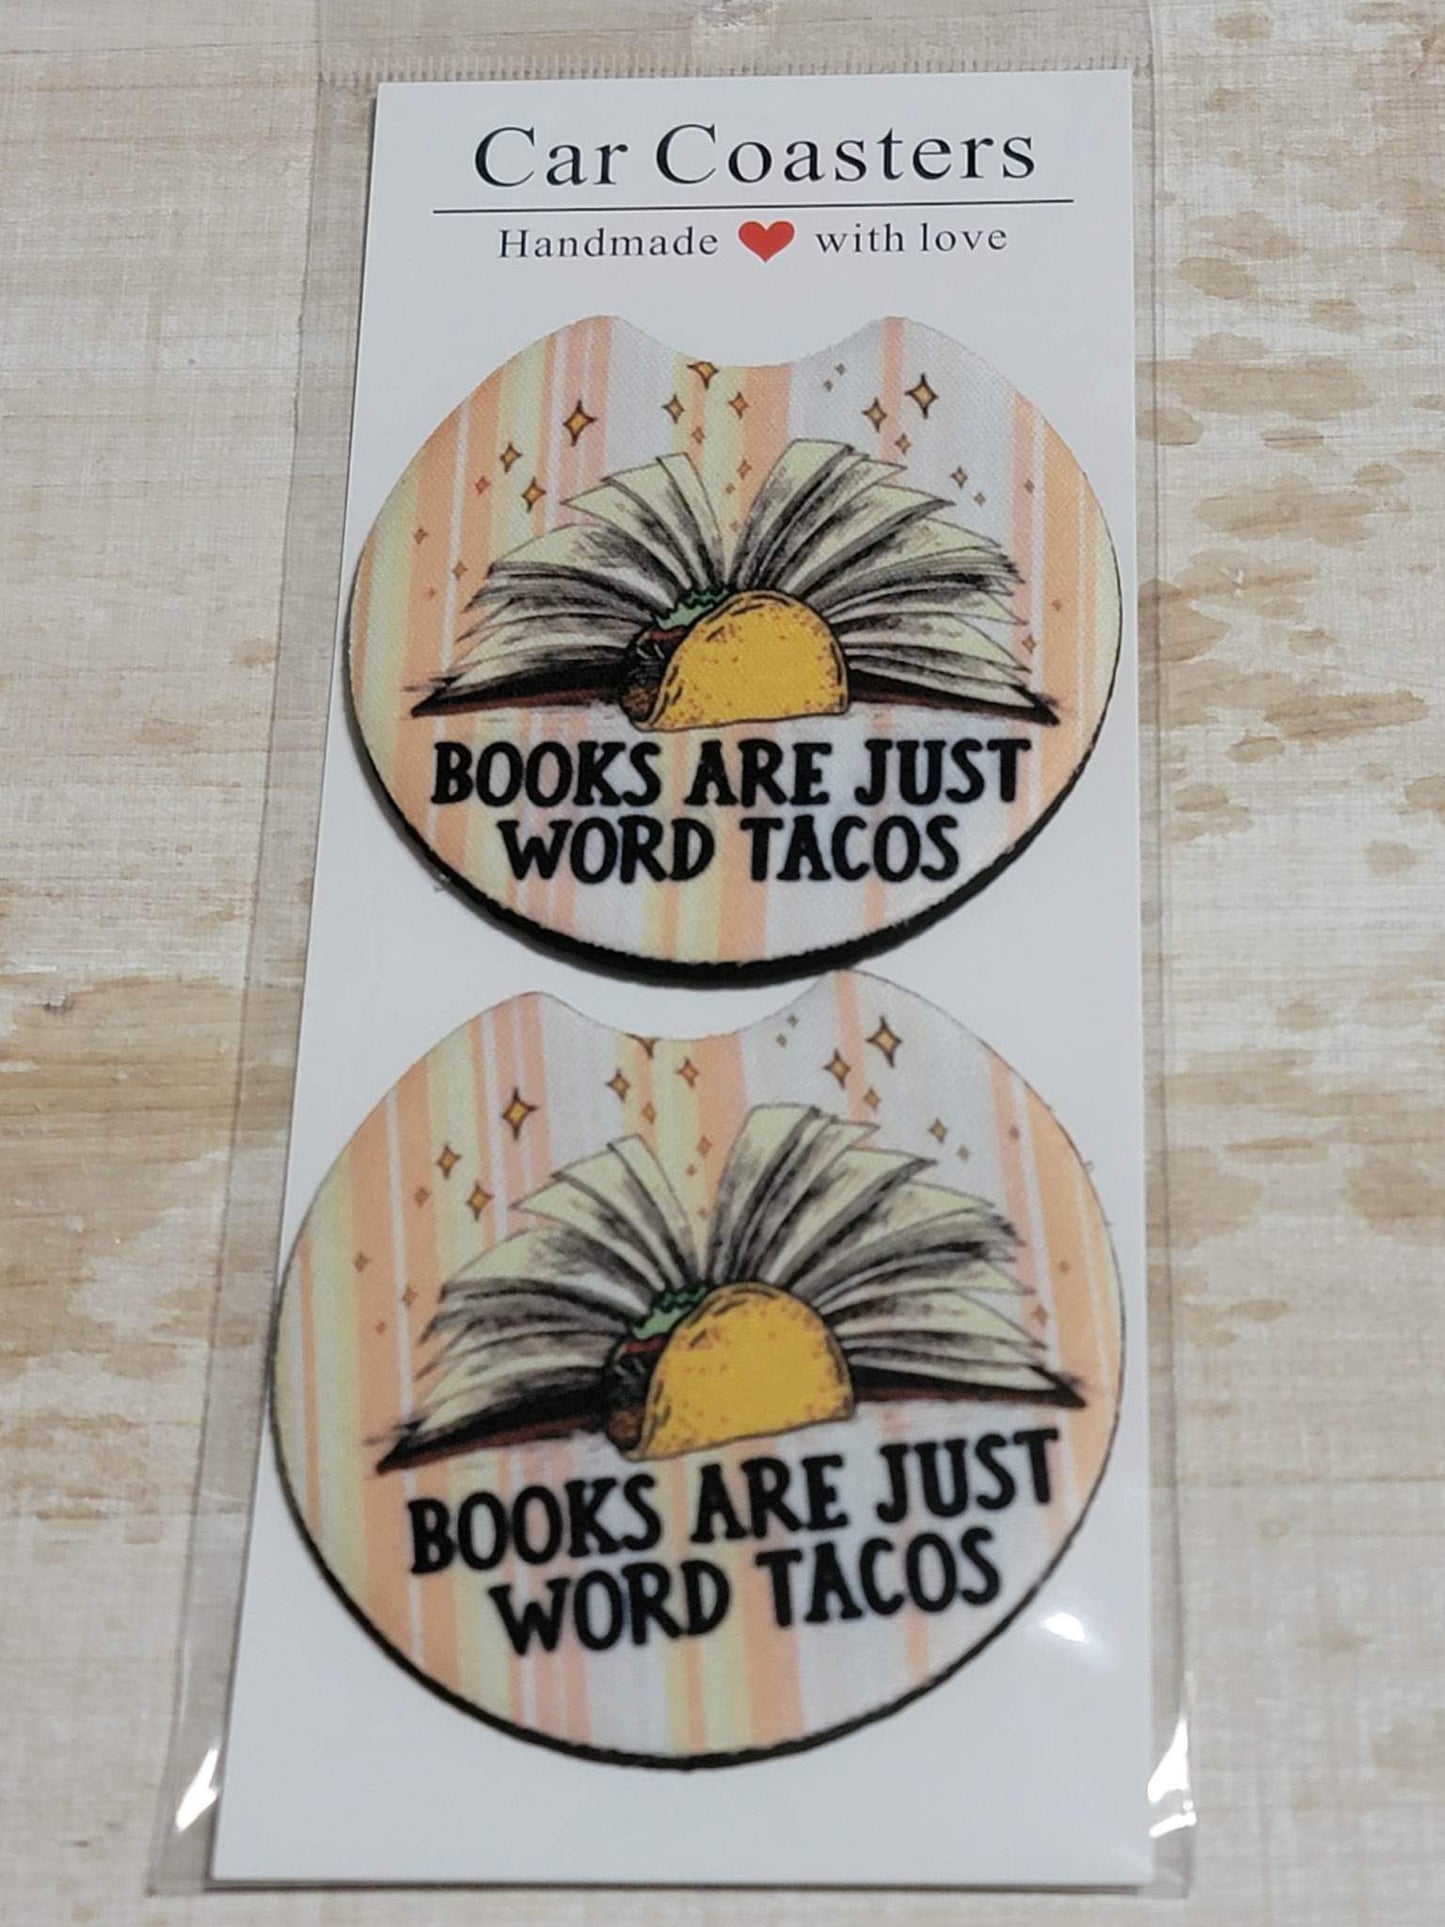 Books are just word tacos